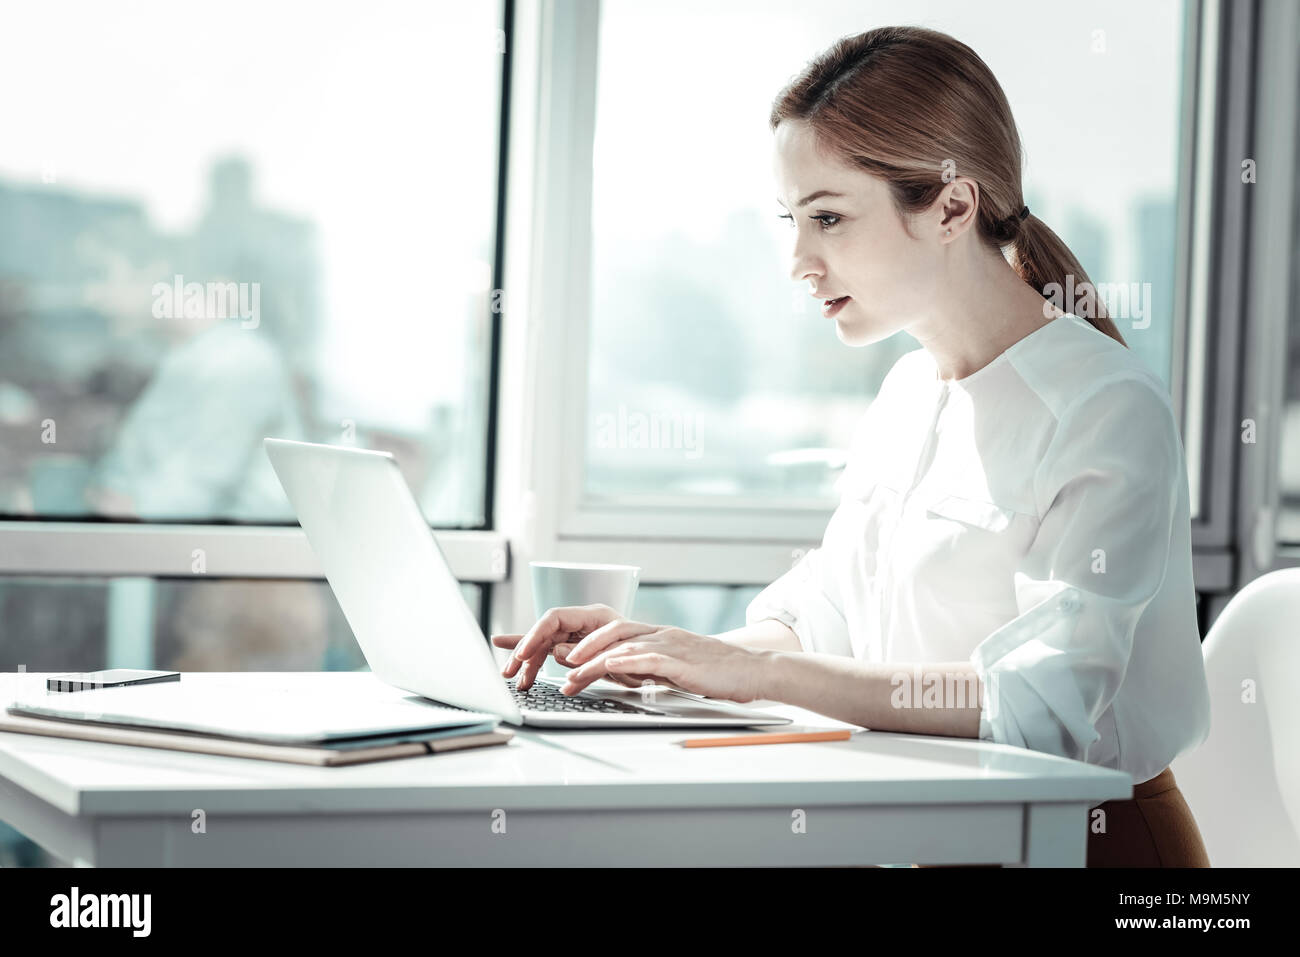 Concentrated busy woman sitting and using the laptop. Stock Photo